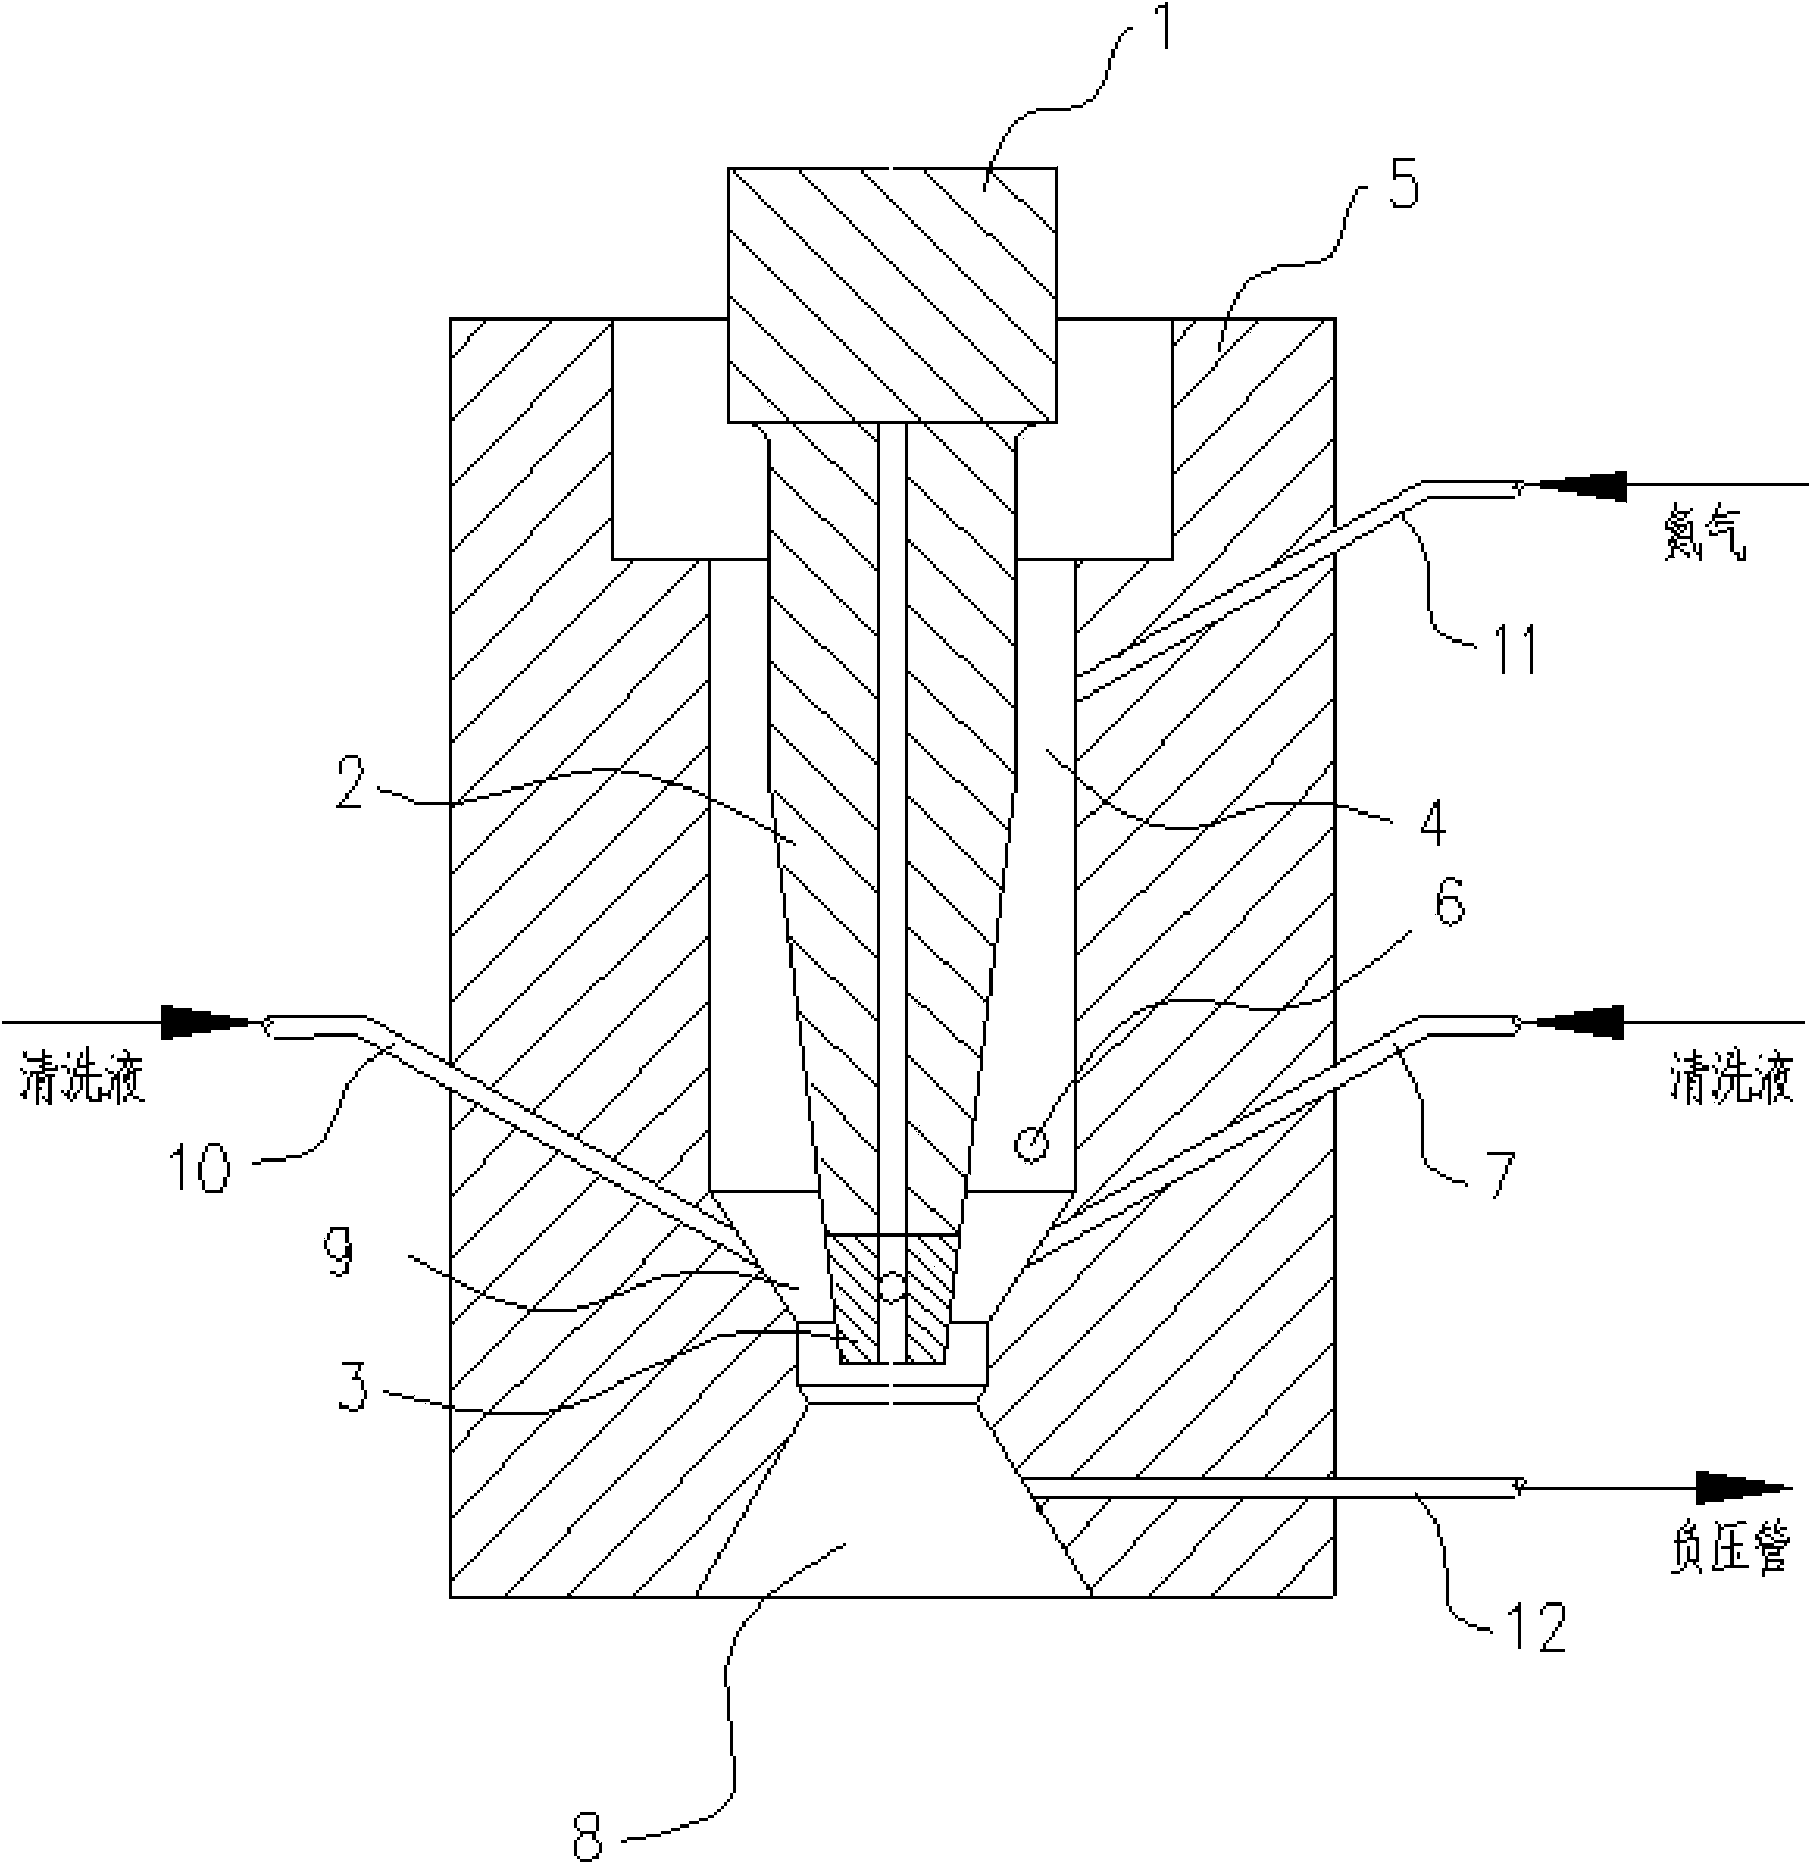 Cleaning trough body structure for photoresist nozzle and application of cleaning trough body structure